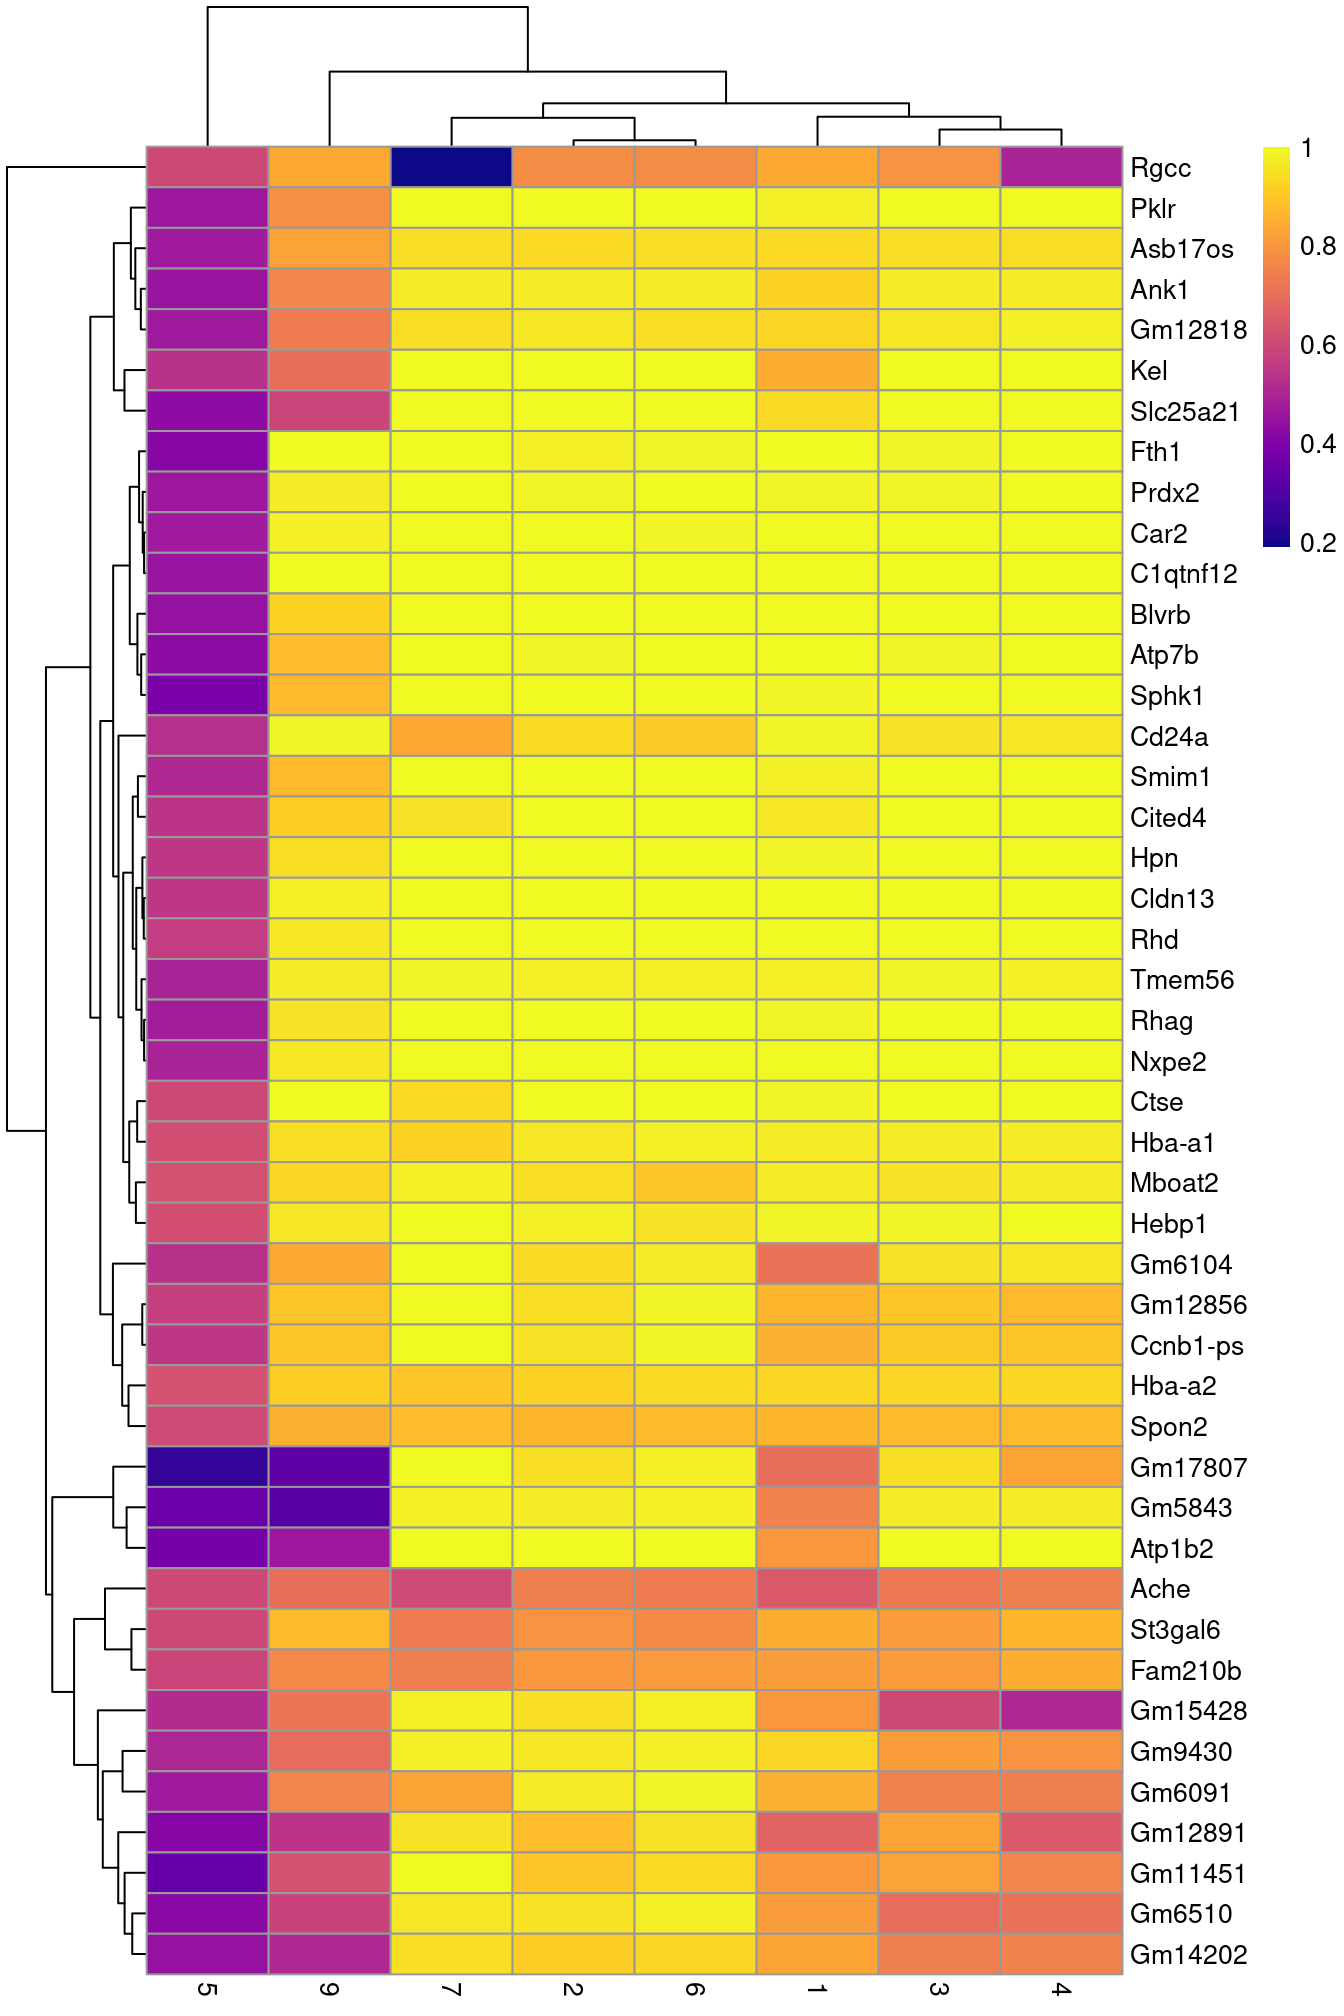 Heatmap of the AUCs for the top marker genes in cluster 8 compared to all other clusters.